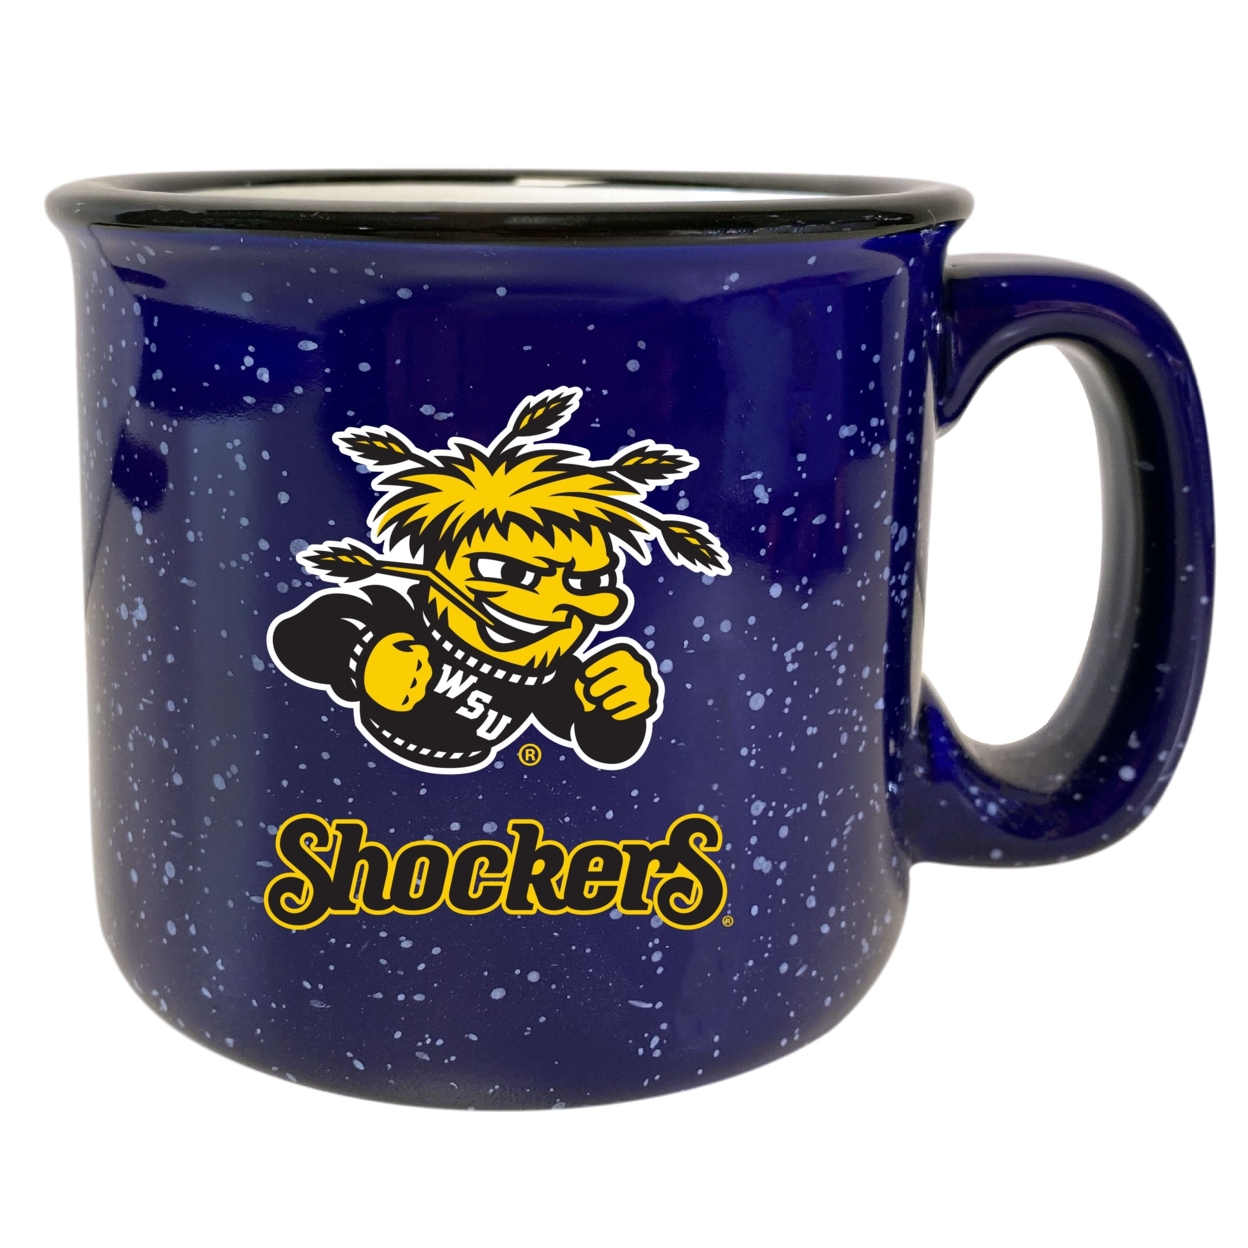 Wichita State Shockers Speckled Ceramic Camper Coffee Mug - Choose Your Color - Navy